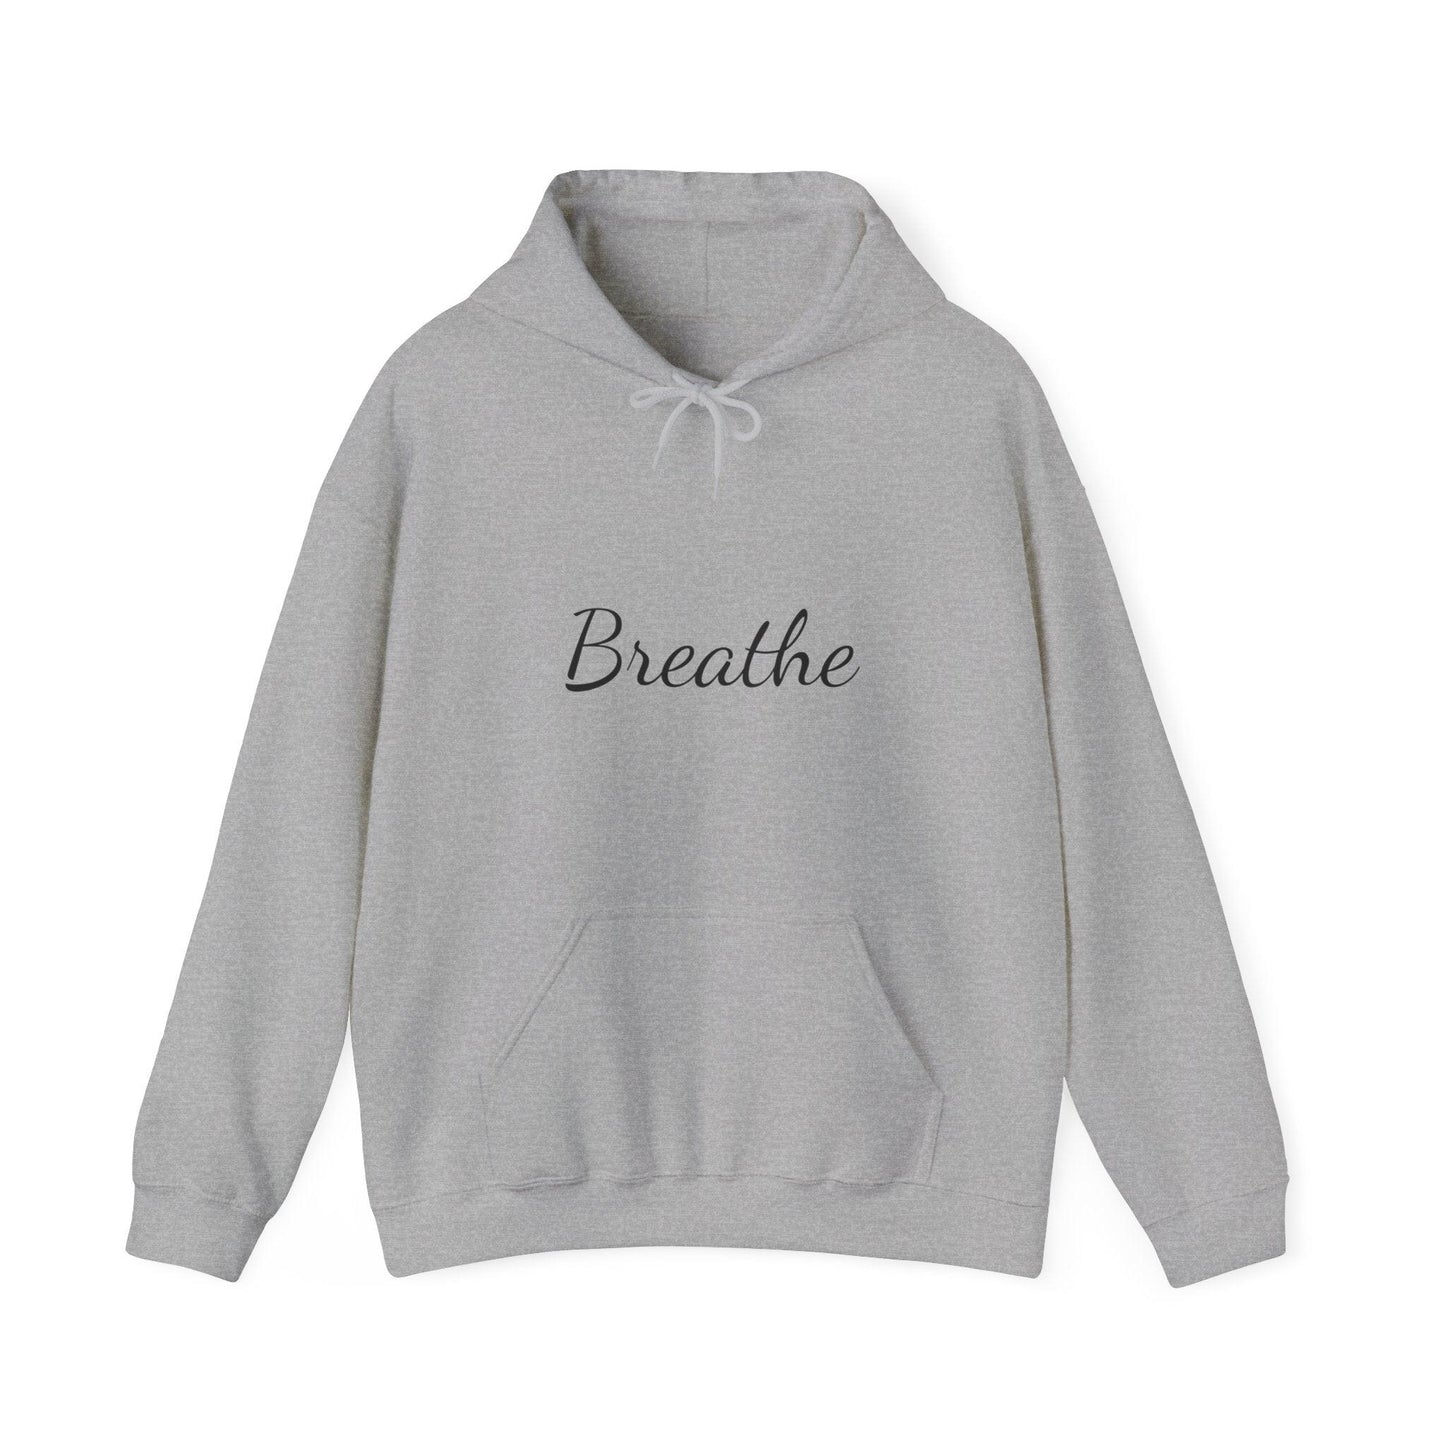 Grey Unisex with Black Breathe Logo Hoodie - Perfect for Travel, Meditation, Mindfulness and daily wear.